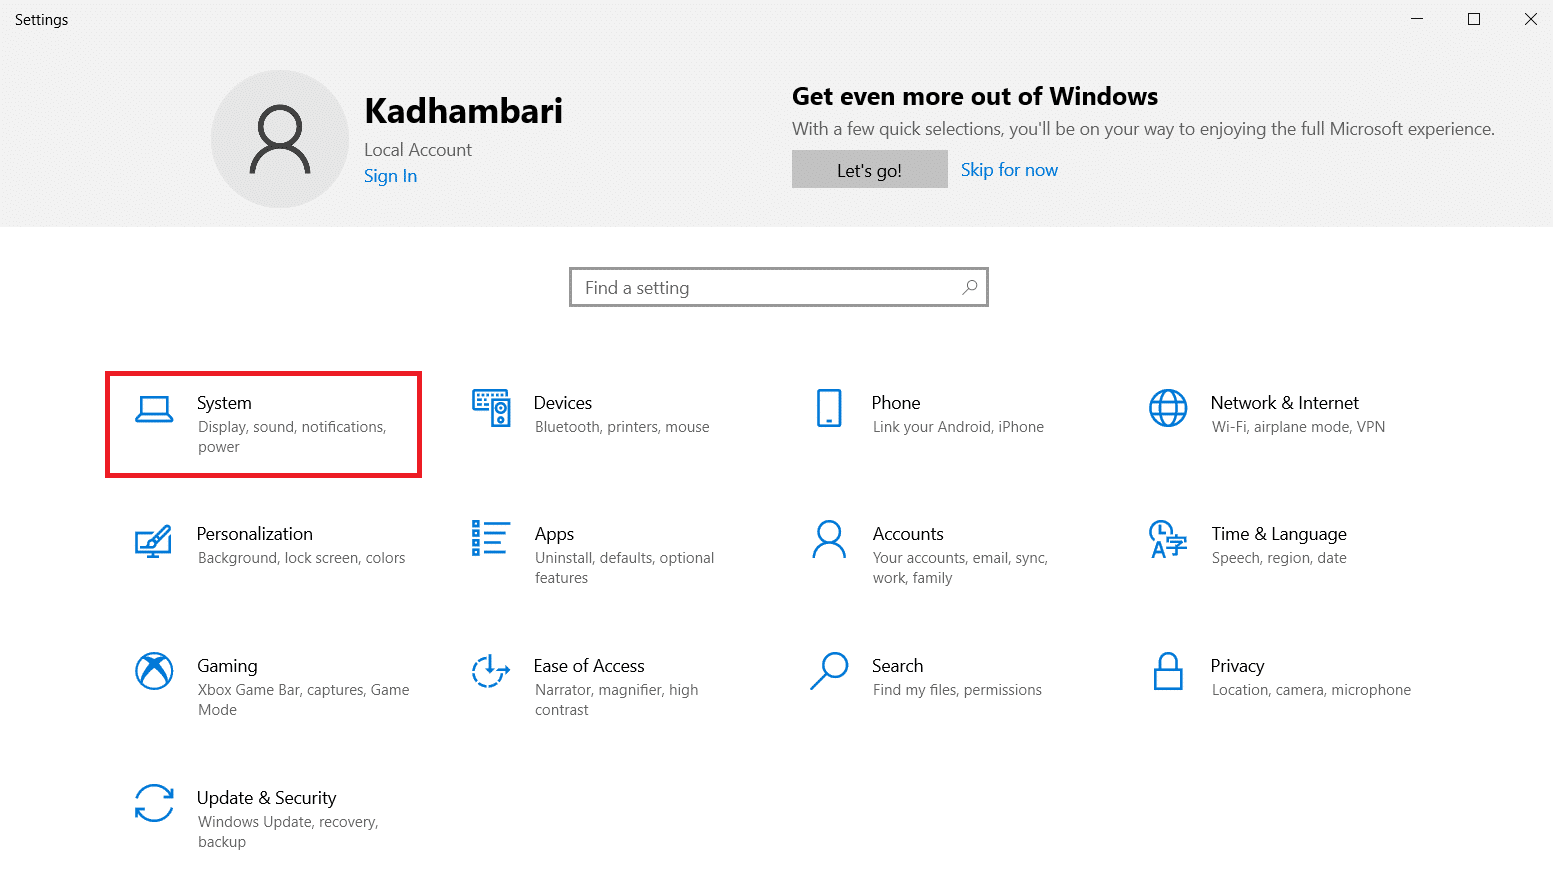 Select System on the Settings page